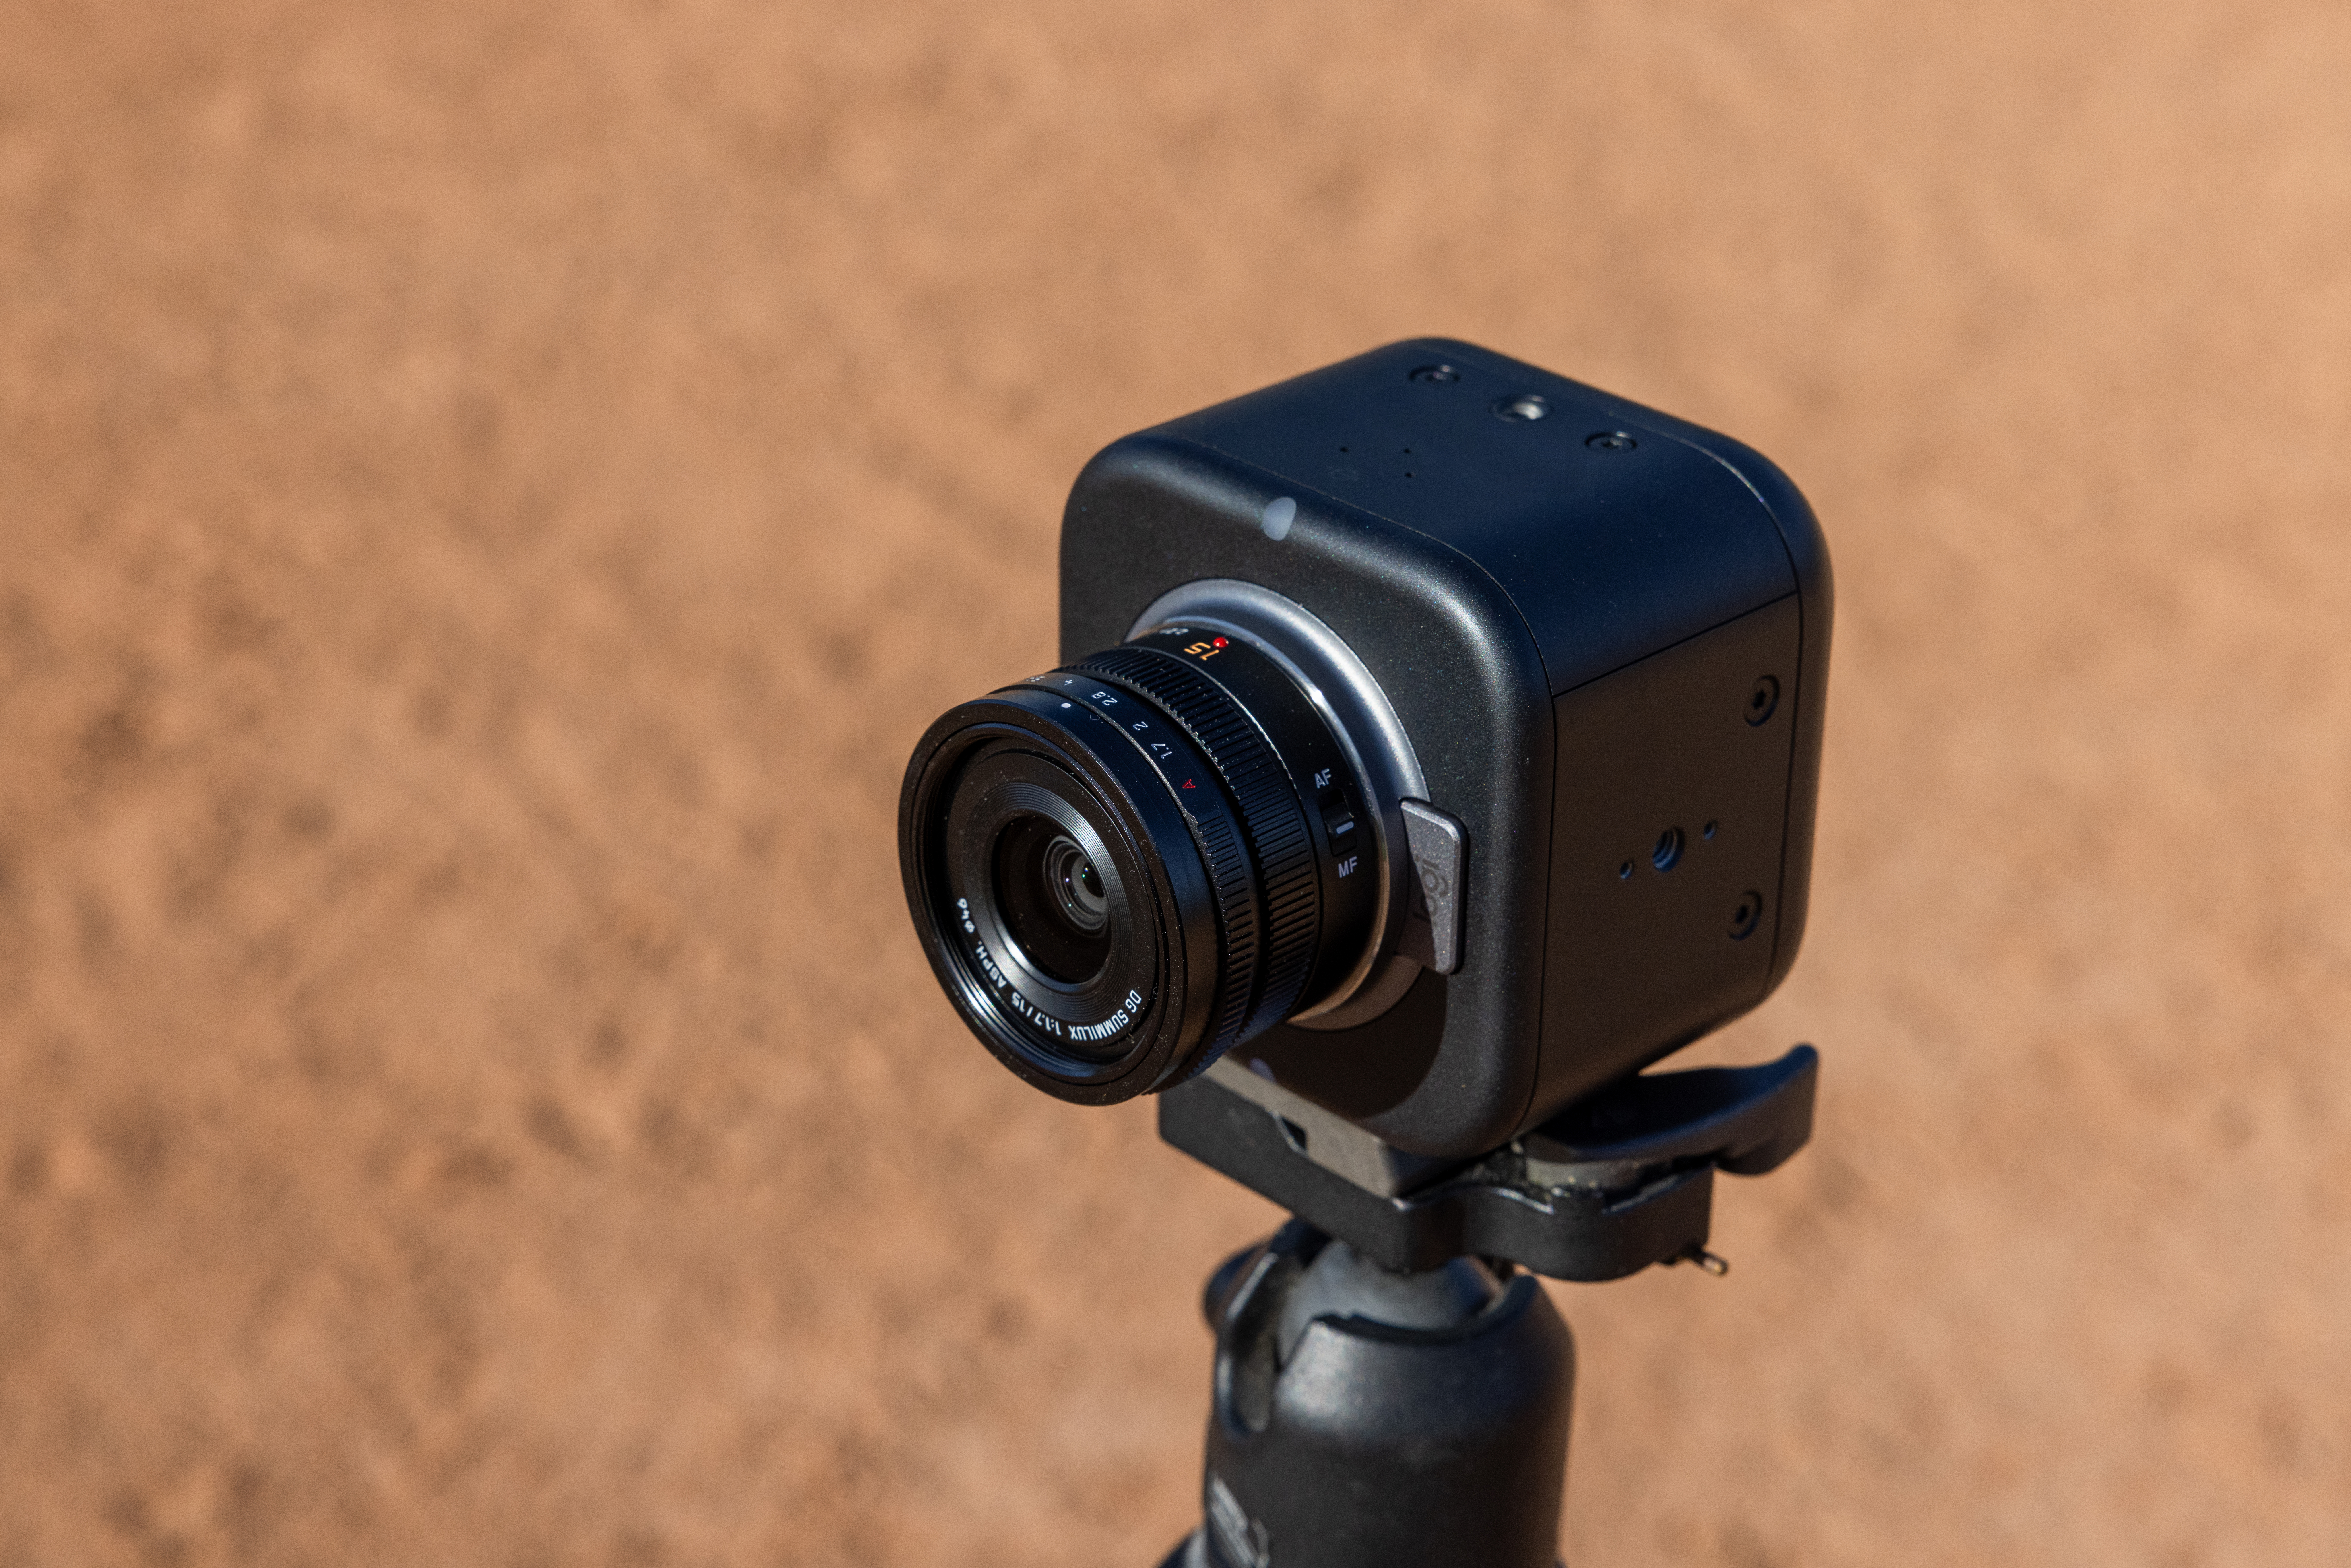 Lifestyle marketing photo of the Logitech Mevo Core livestreaming camera. View from slightly above, facing its front-left side. It’s mounted on a tripod with a dirt field (blurred) visible behind it.